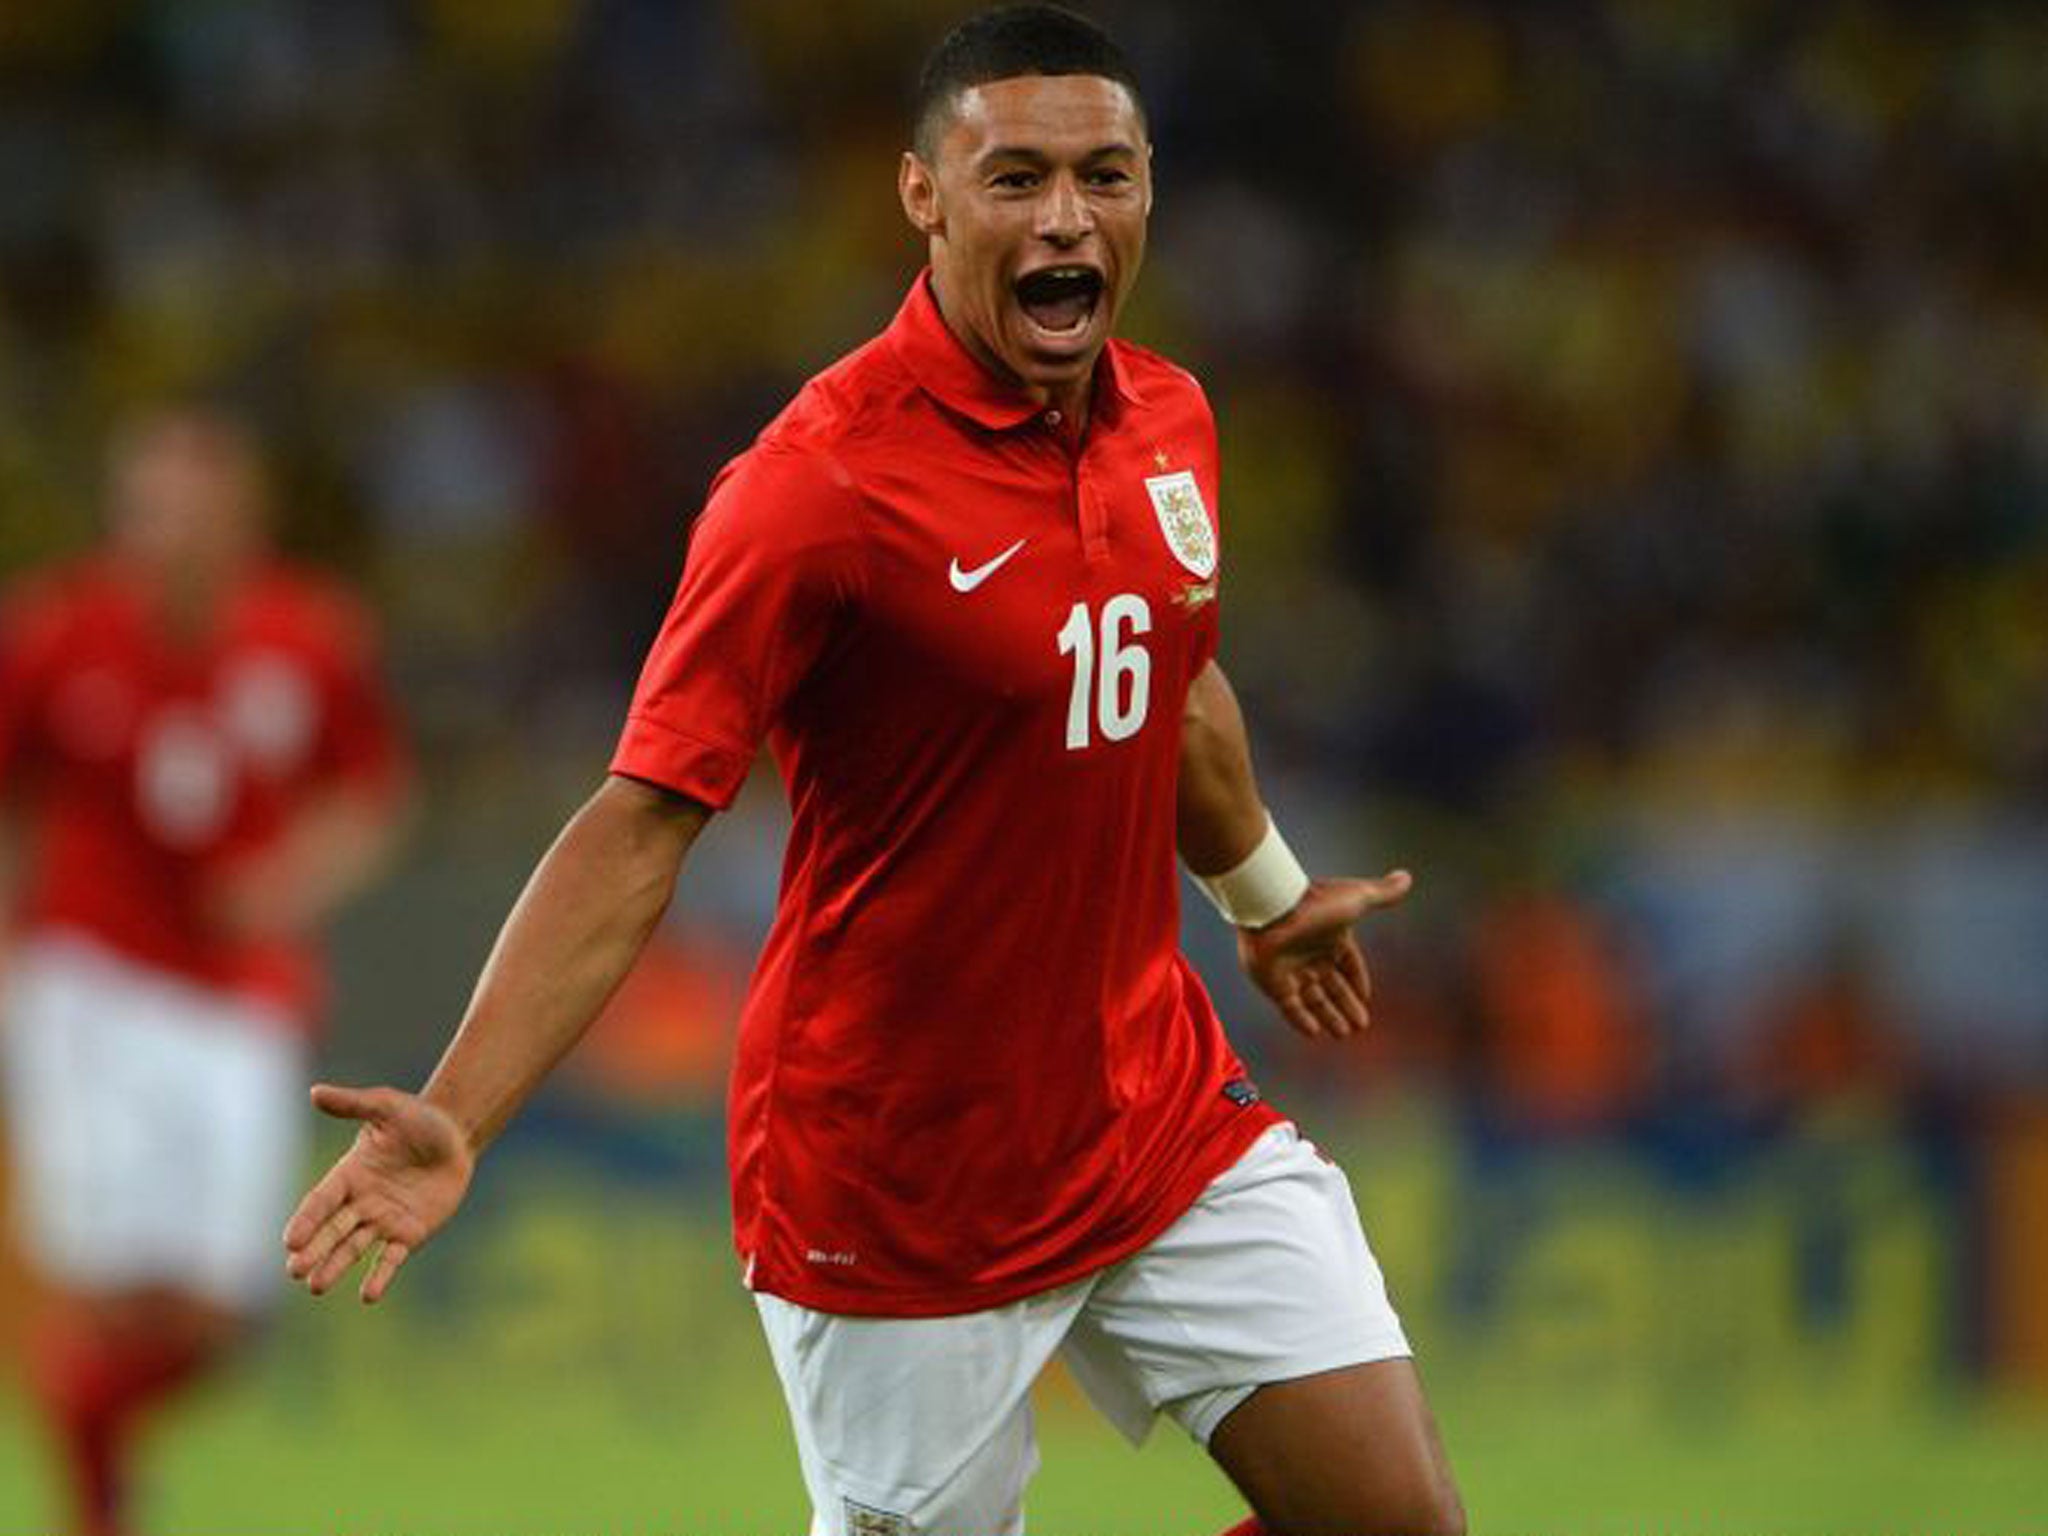 Alex Oxlade-Chamberlain admitted he could recall little of his dramatic contribution to England's draw in Brazil